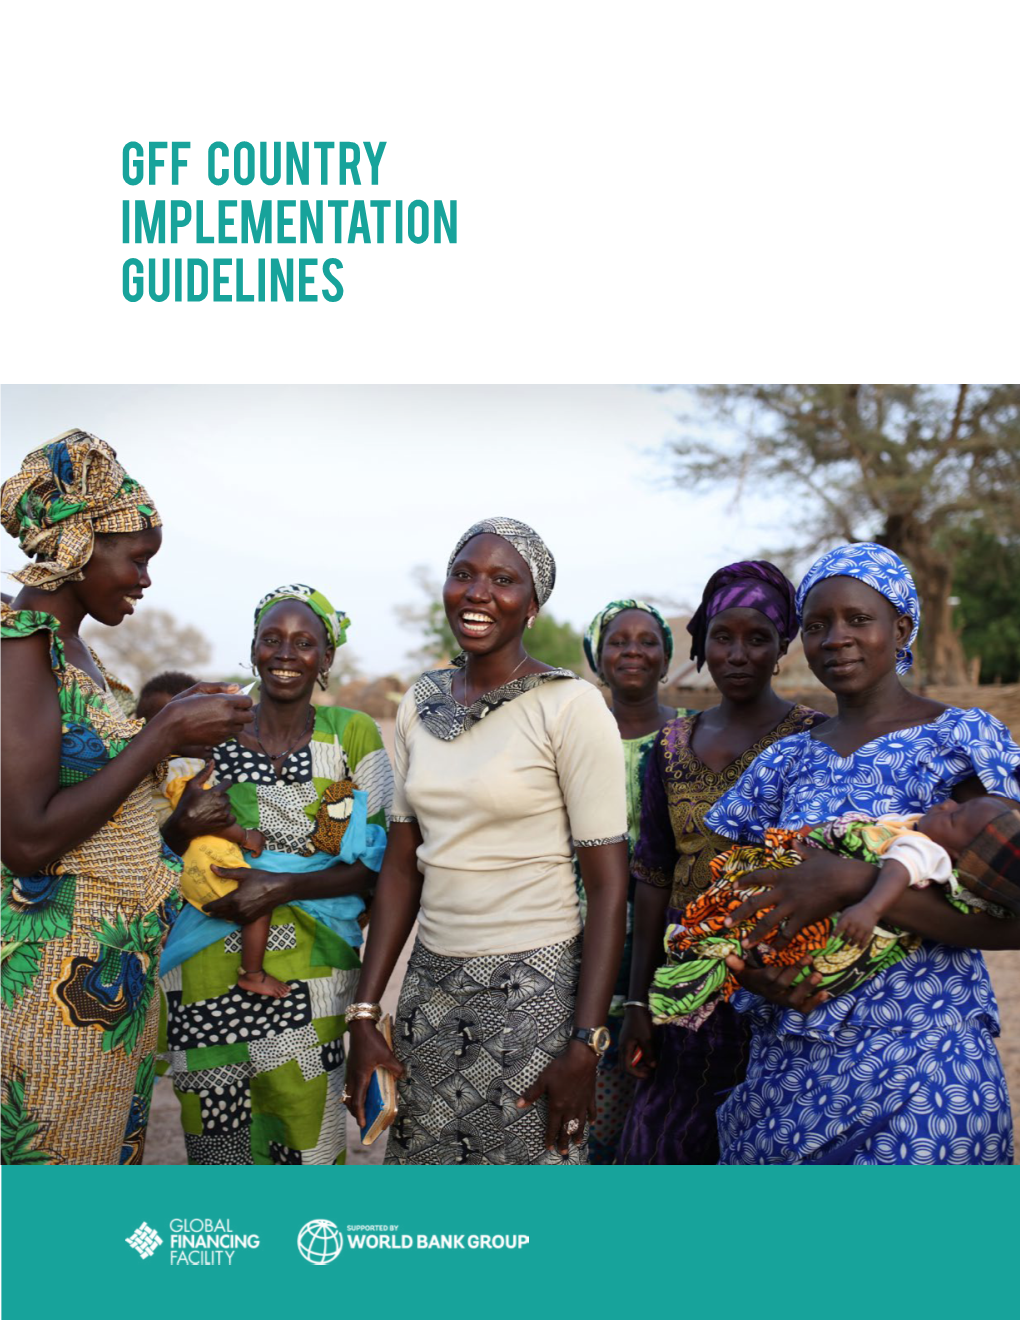 GFF Country Implementation Guidelines